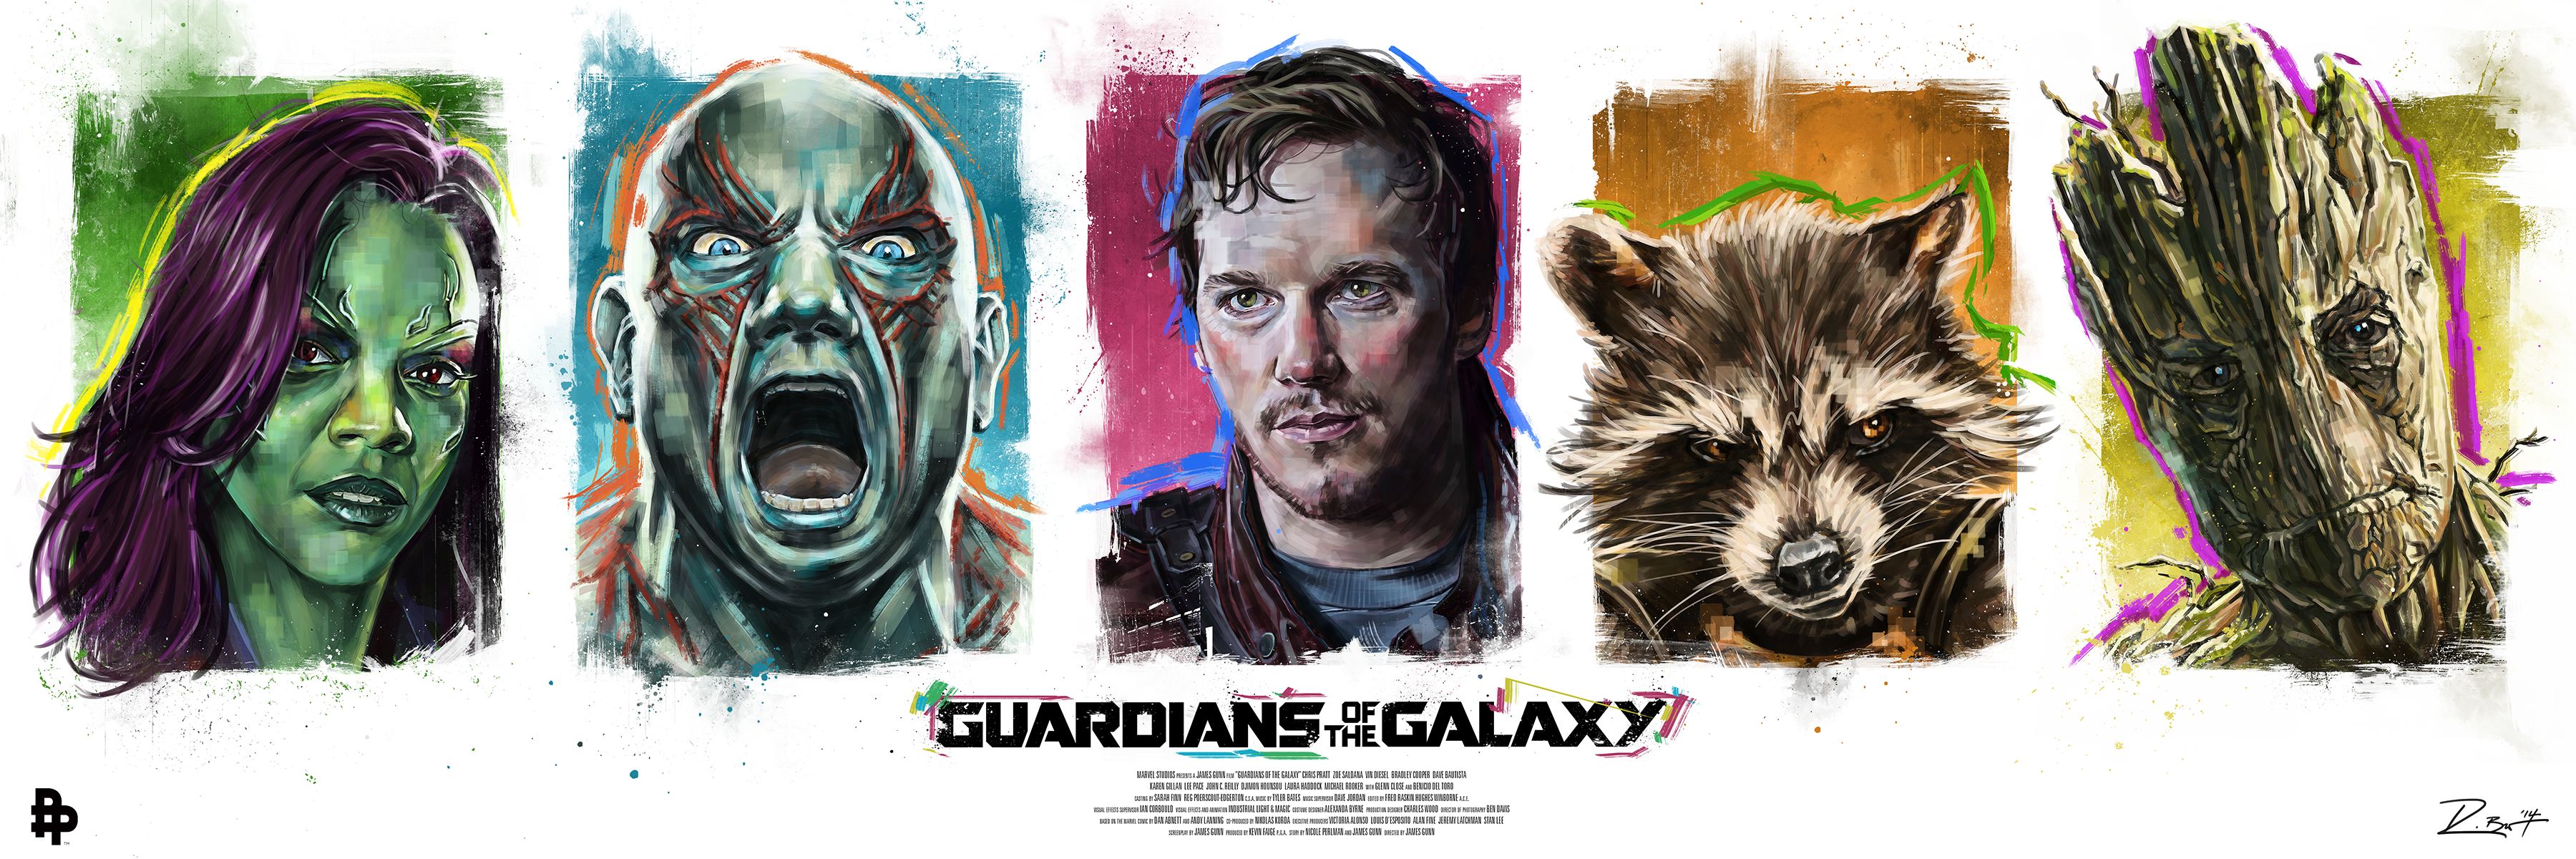 Guardians of the galaxy by Robert Bruno